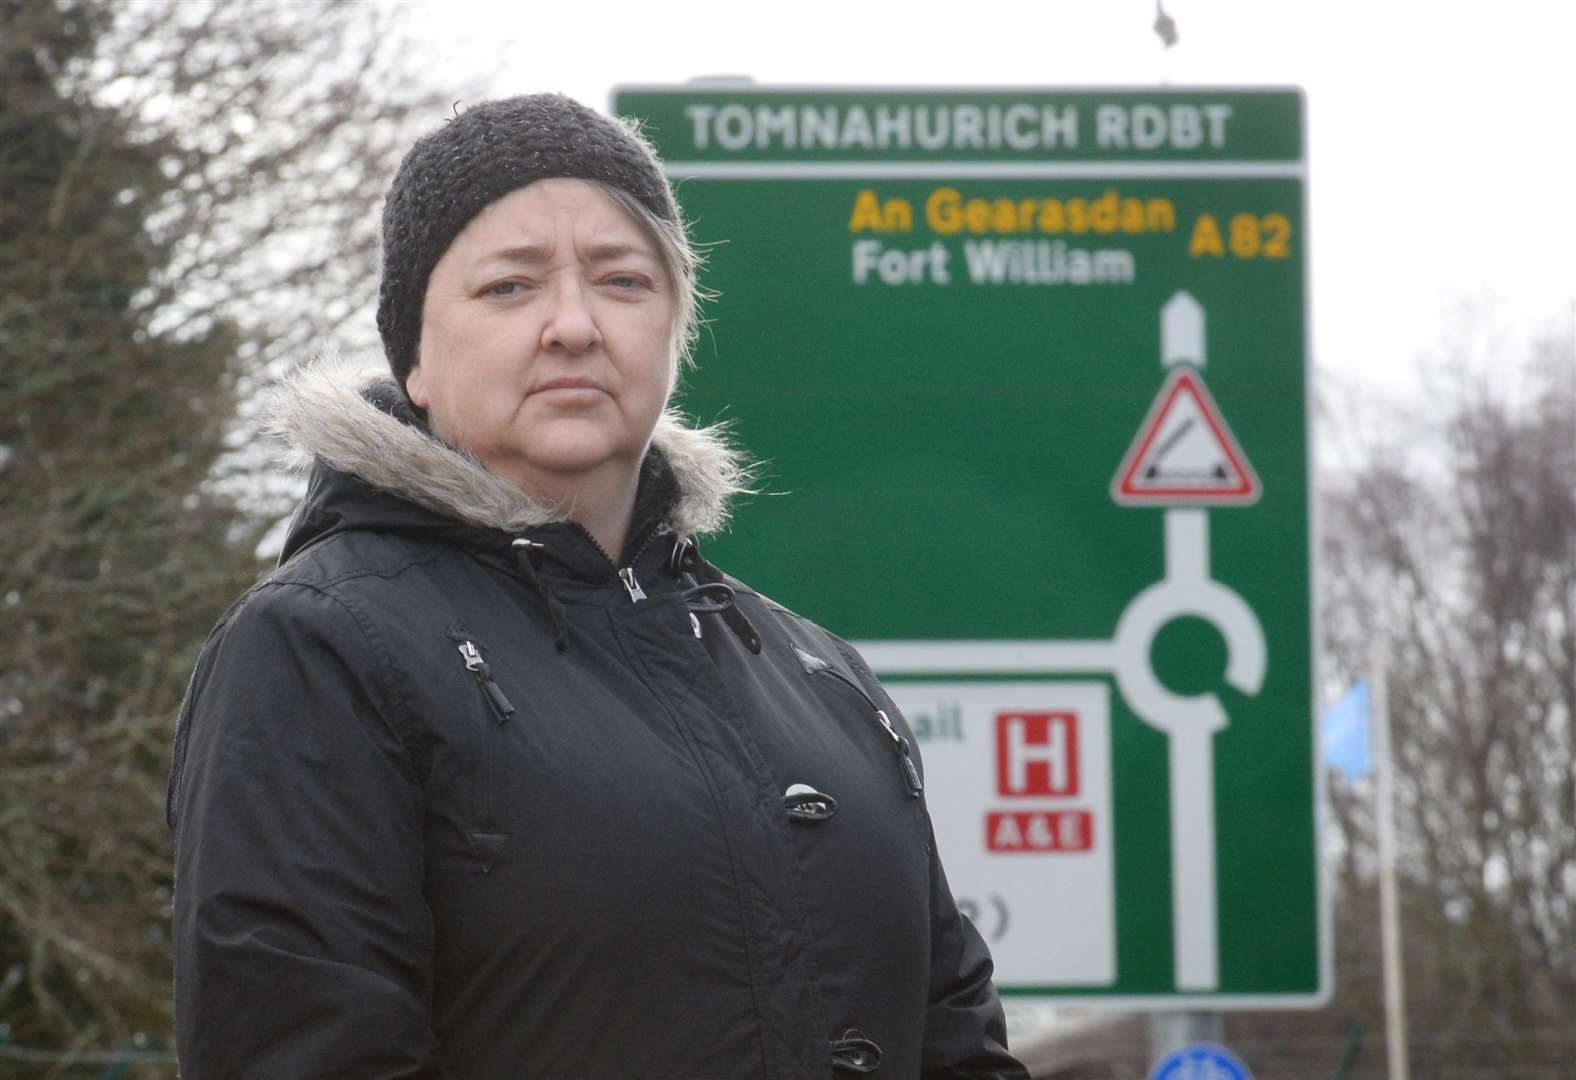 Sammy Cousin wants action on the A82.